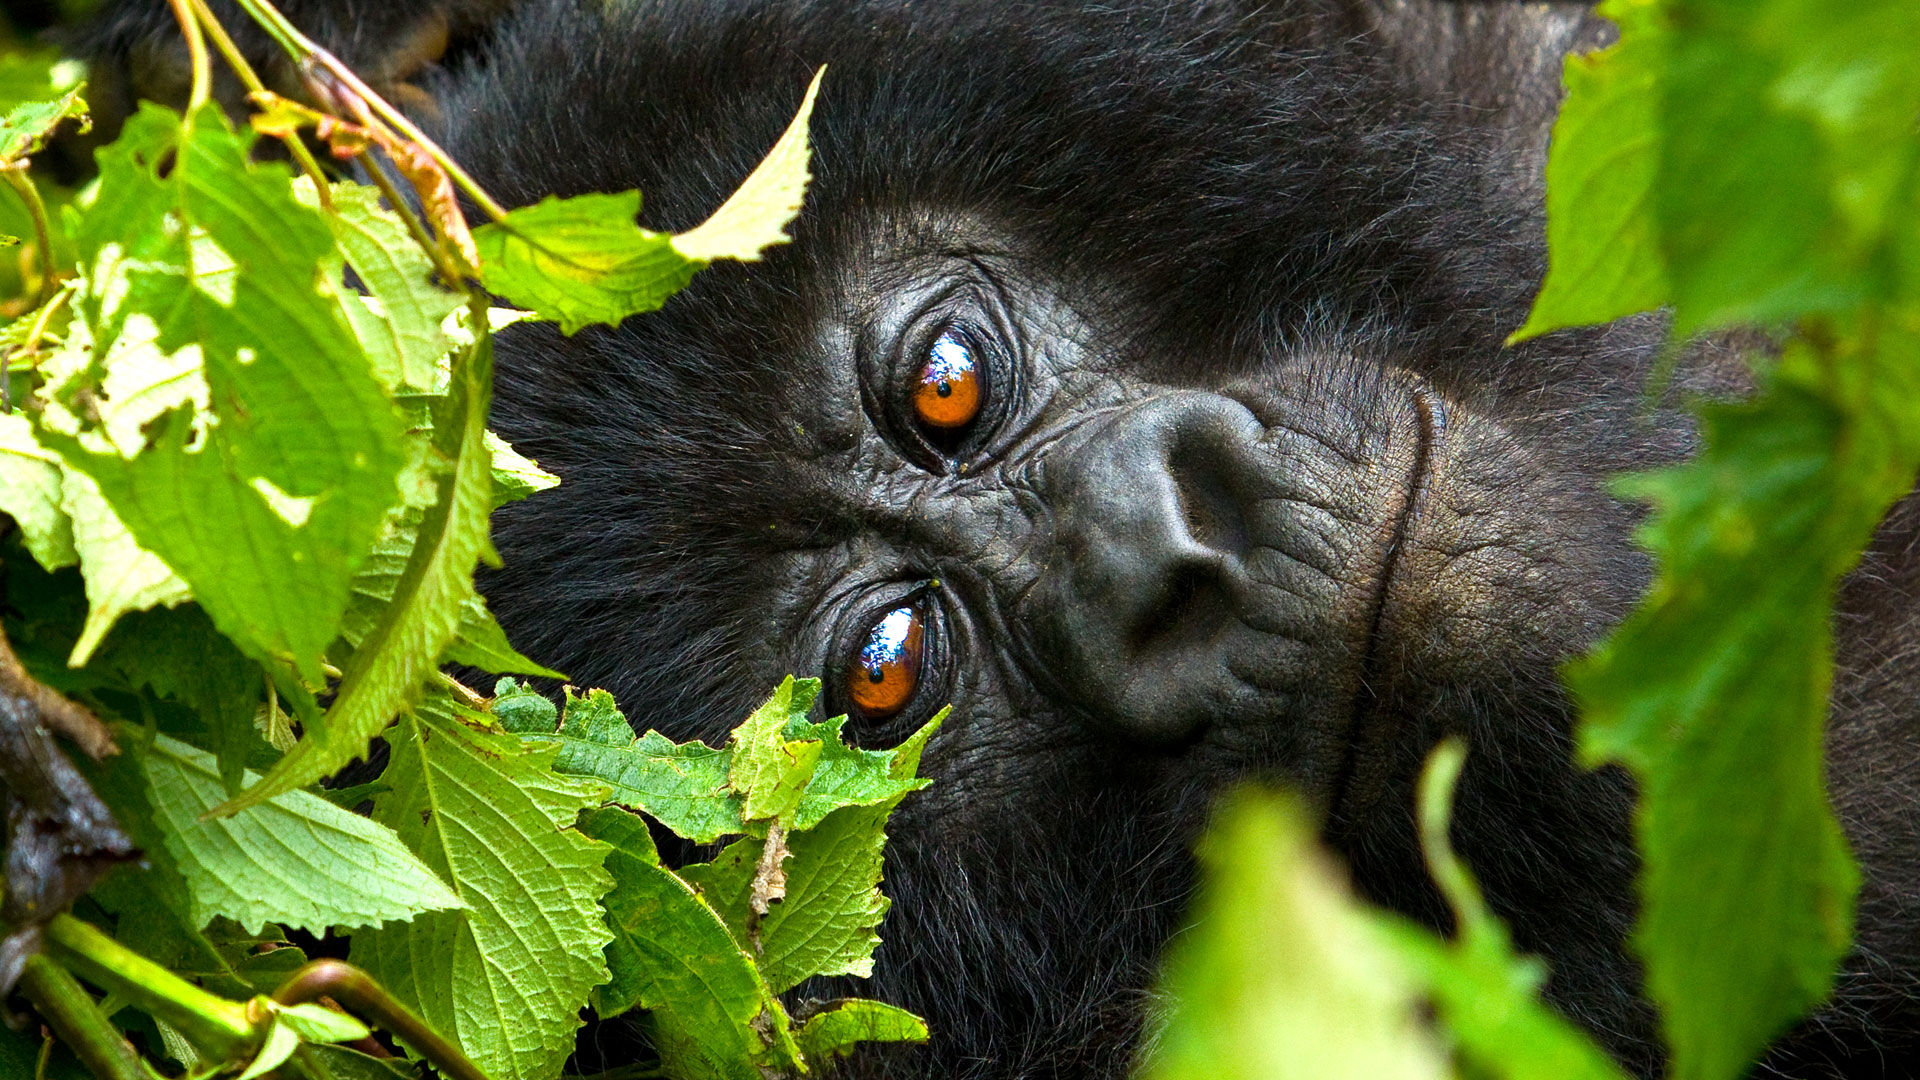 What you should know about seasons when planning a gorilla safari in Uganda